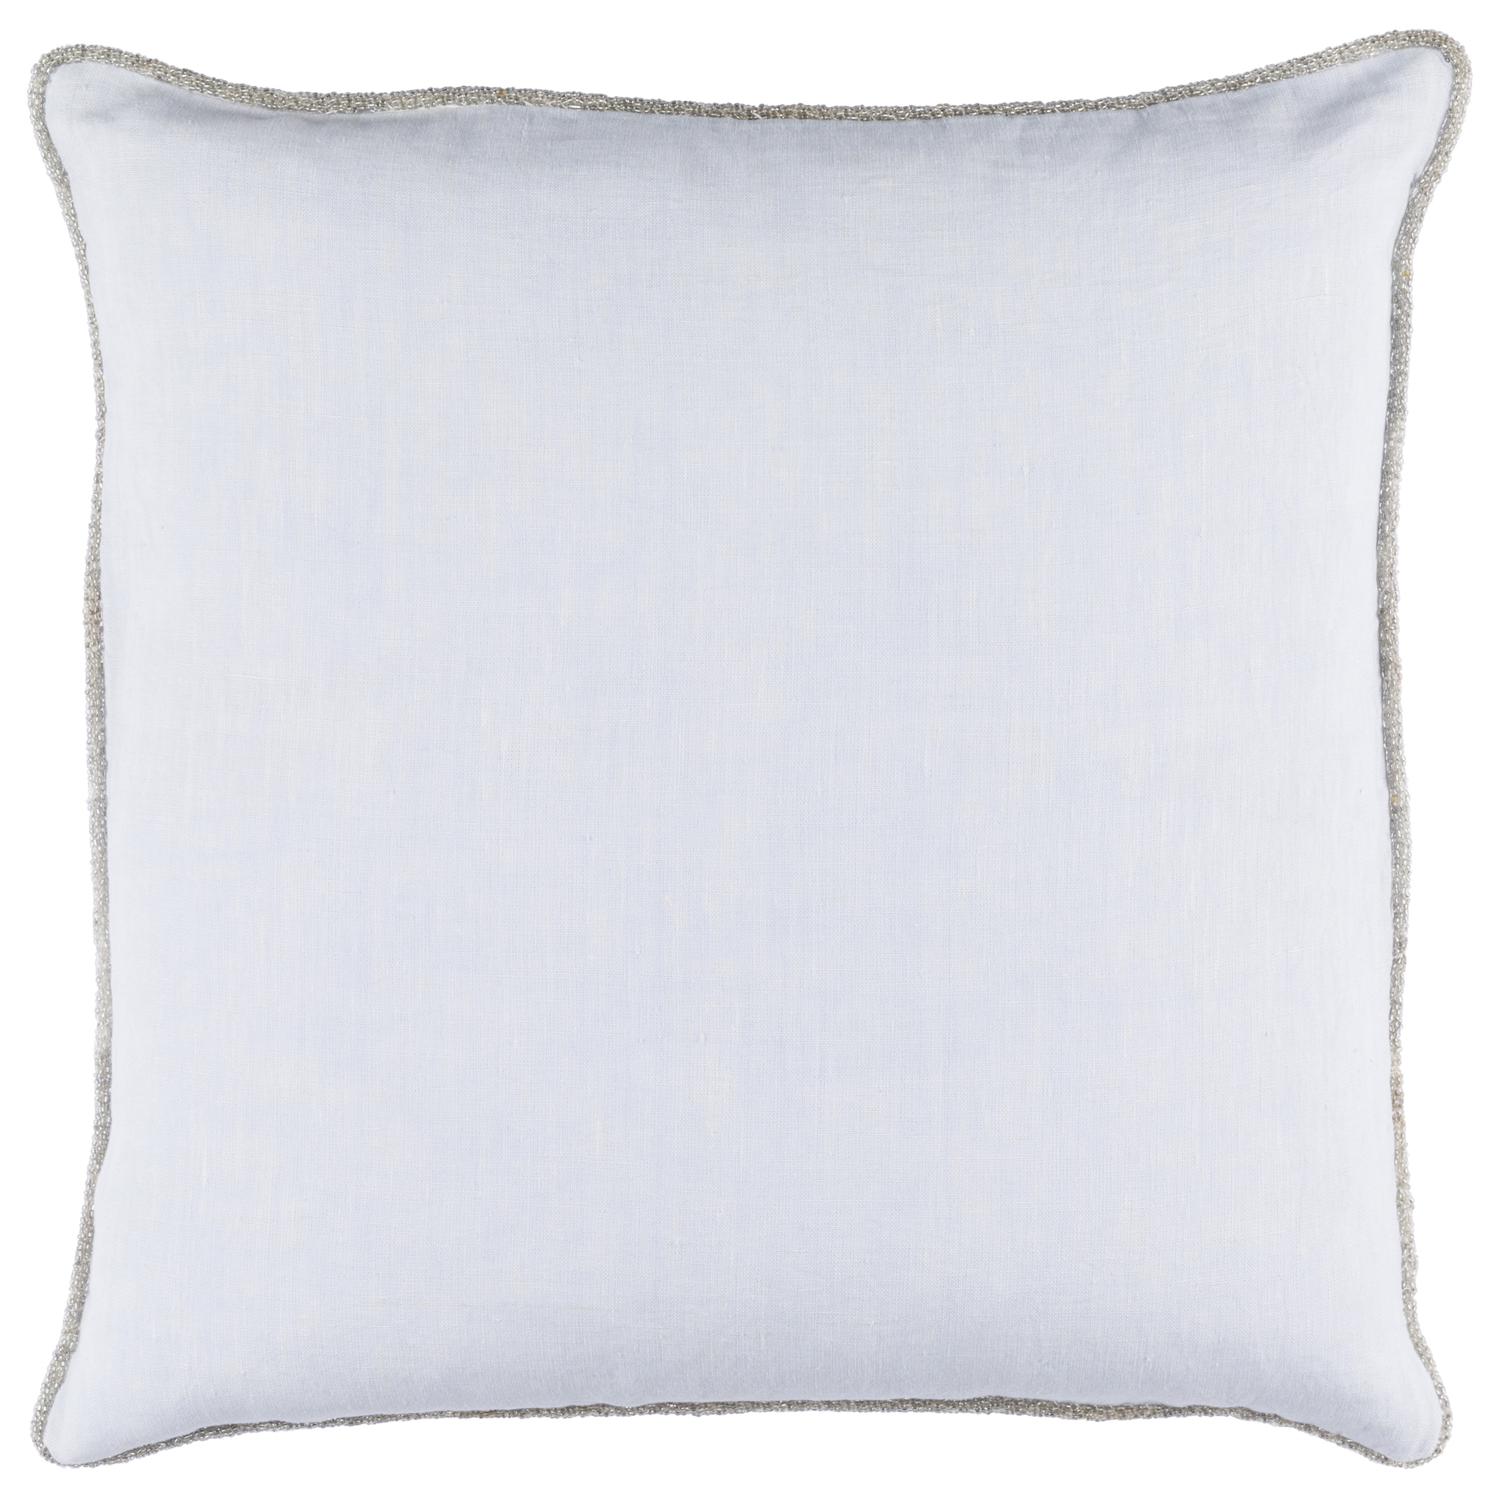 Pillows + Throws + Rugs, Pale Blue Madeline Pillow